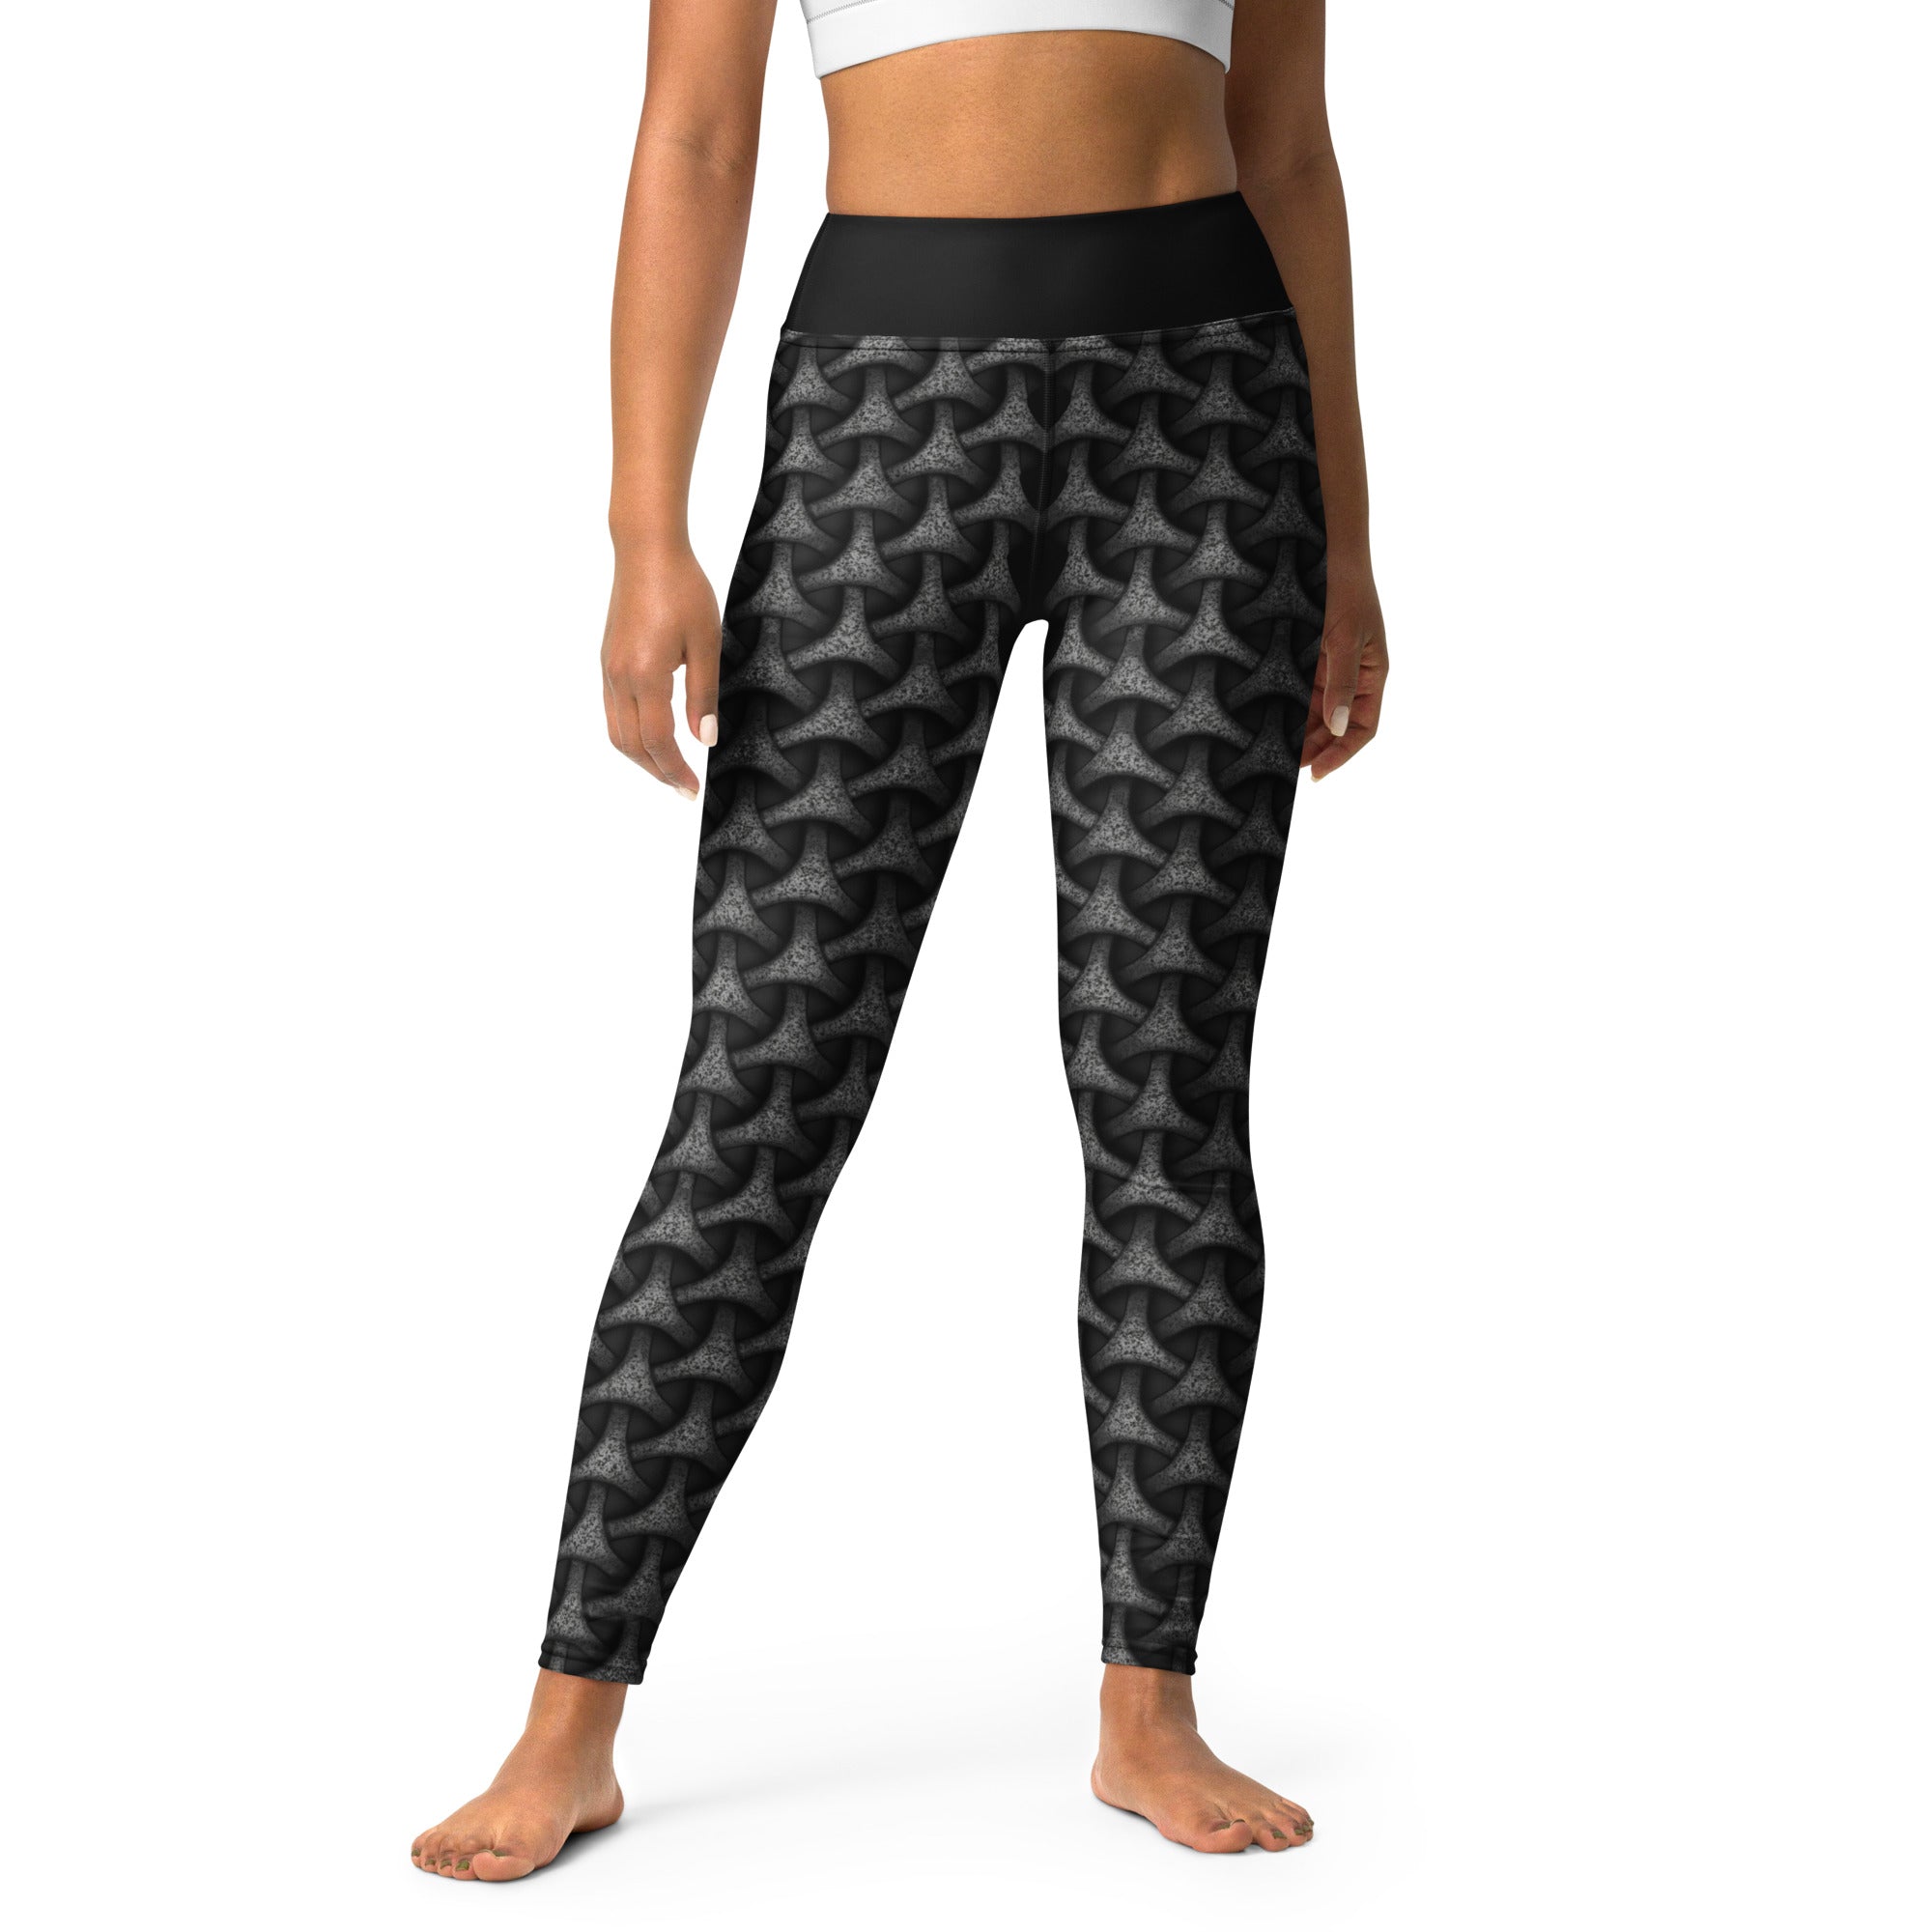 Cosmic Fusion Tristar Leggings perfect for a serene meditation in nature.